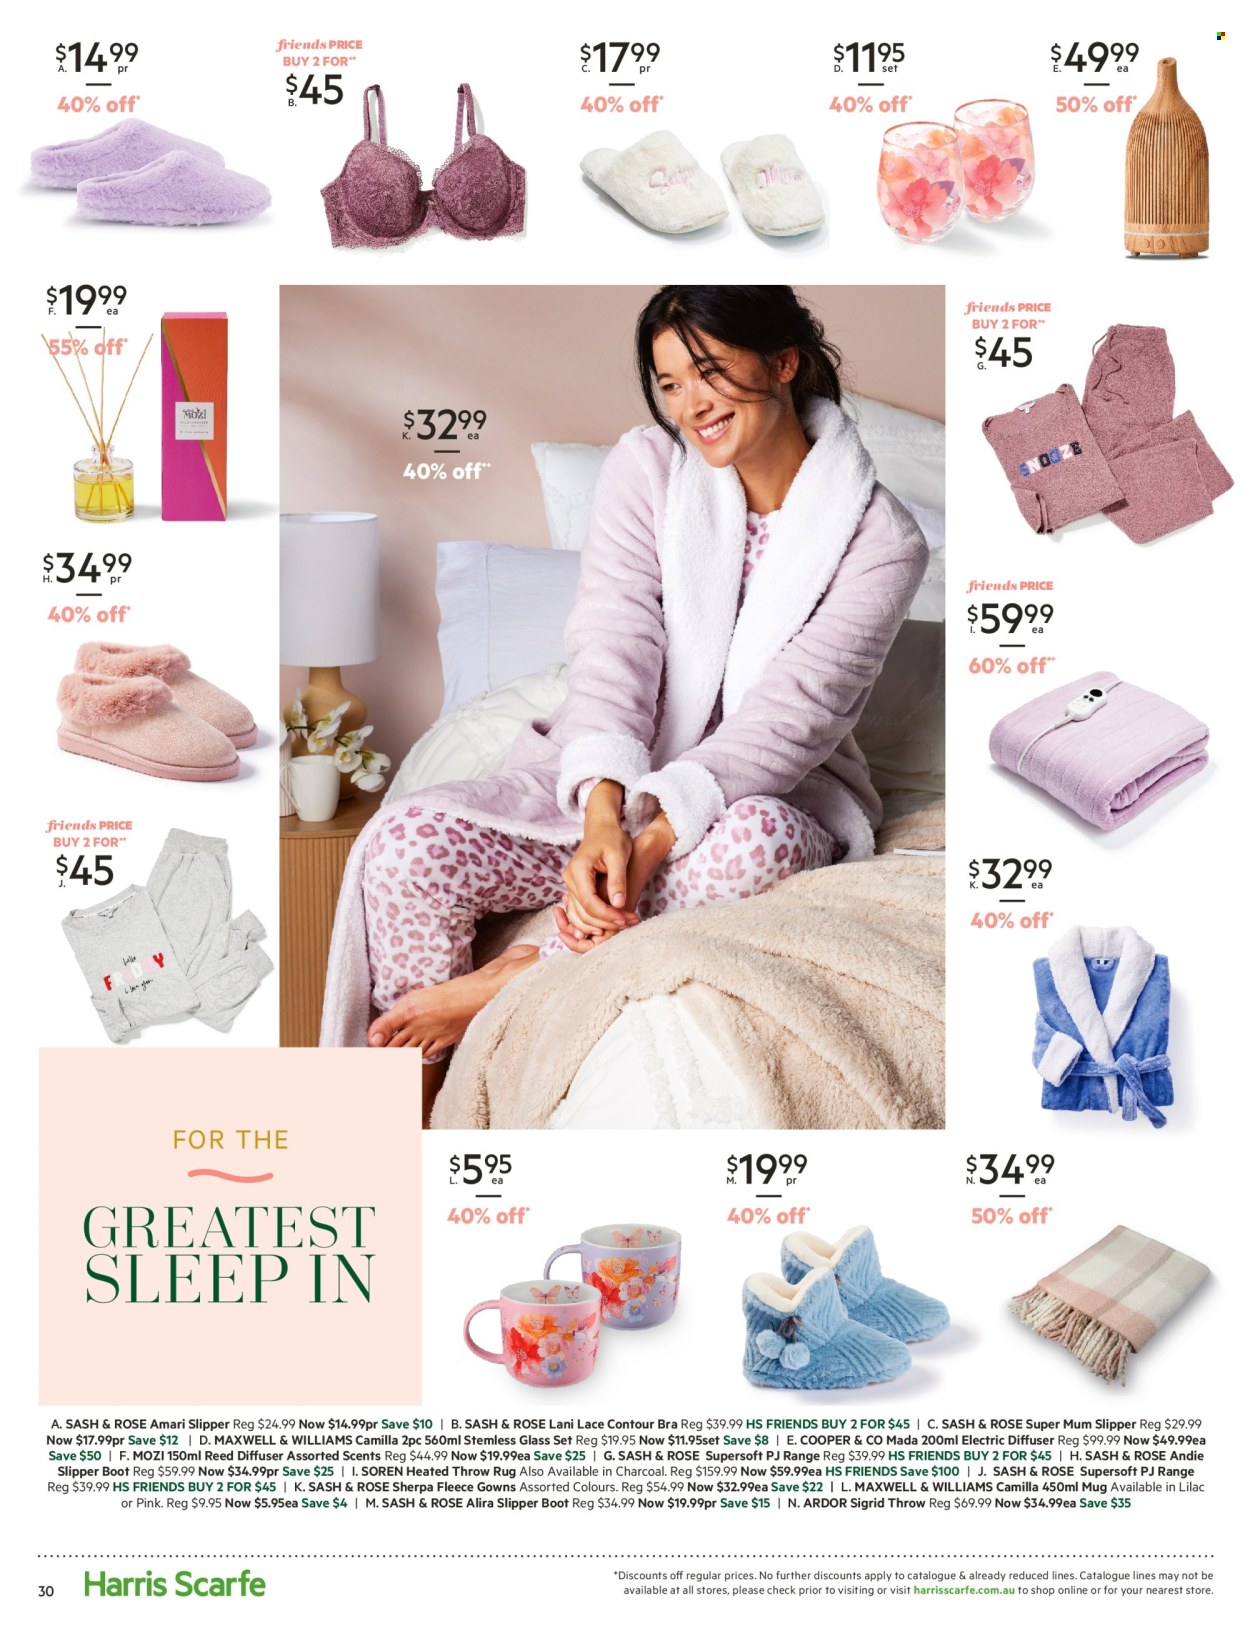 thumbnail - Harris Scarfe Catalogue - Sales products - boots, slippers, mug, diffuser, blanket, heated throw, sherpa, bra. Page 30.